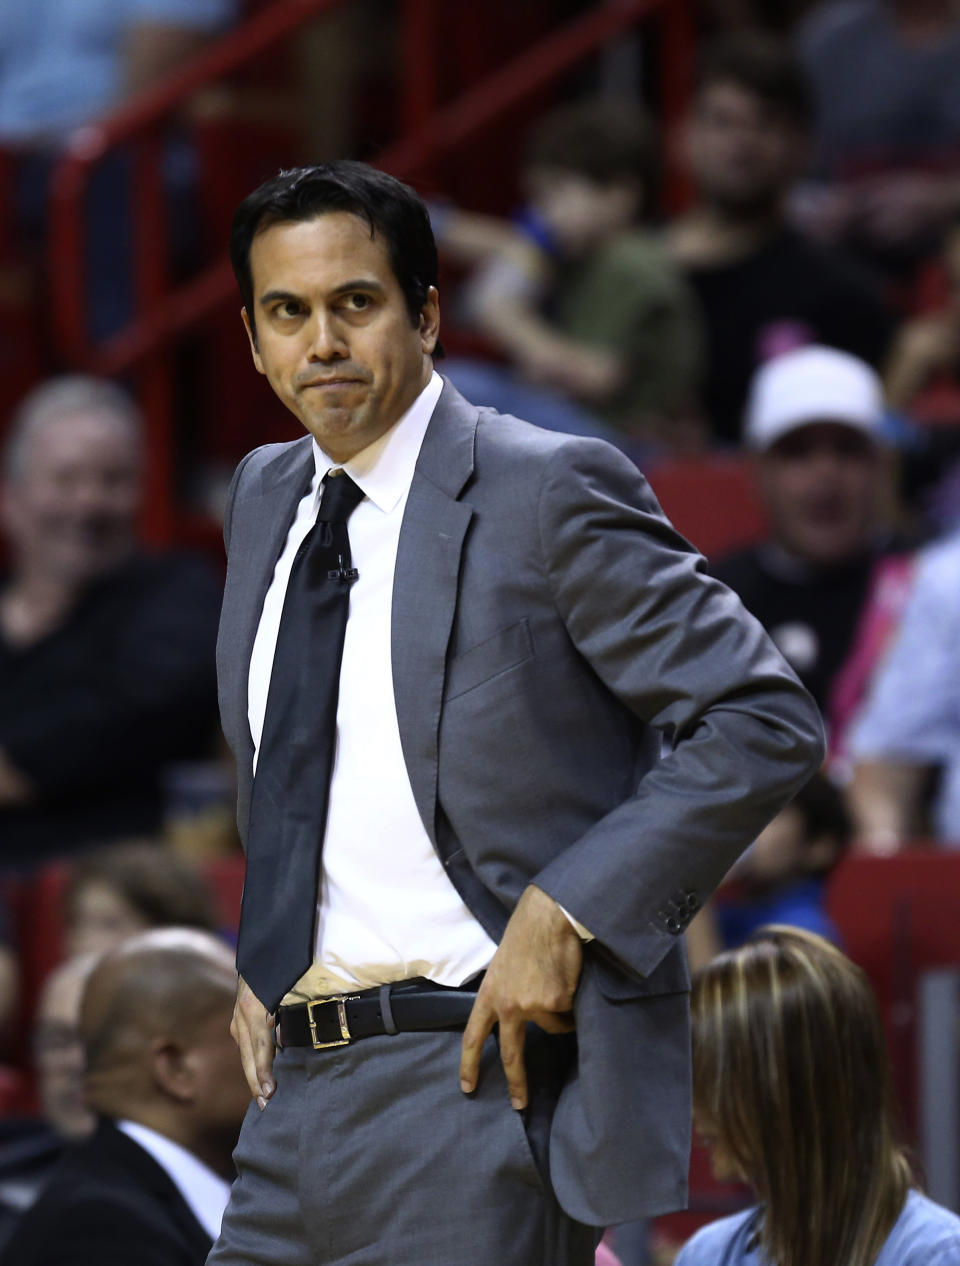 Miami Heat coach Erik Spoelstra watches game action against the San Antonio Spurs during the first half of a NBA basketball game in Miami, Sunday, Jan. 26, 2014. (AP Photo/J Pat Carter)